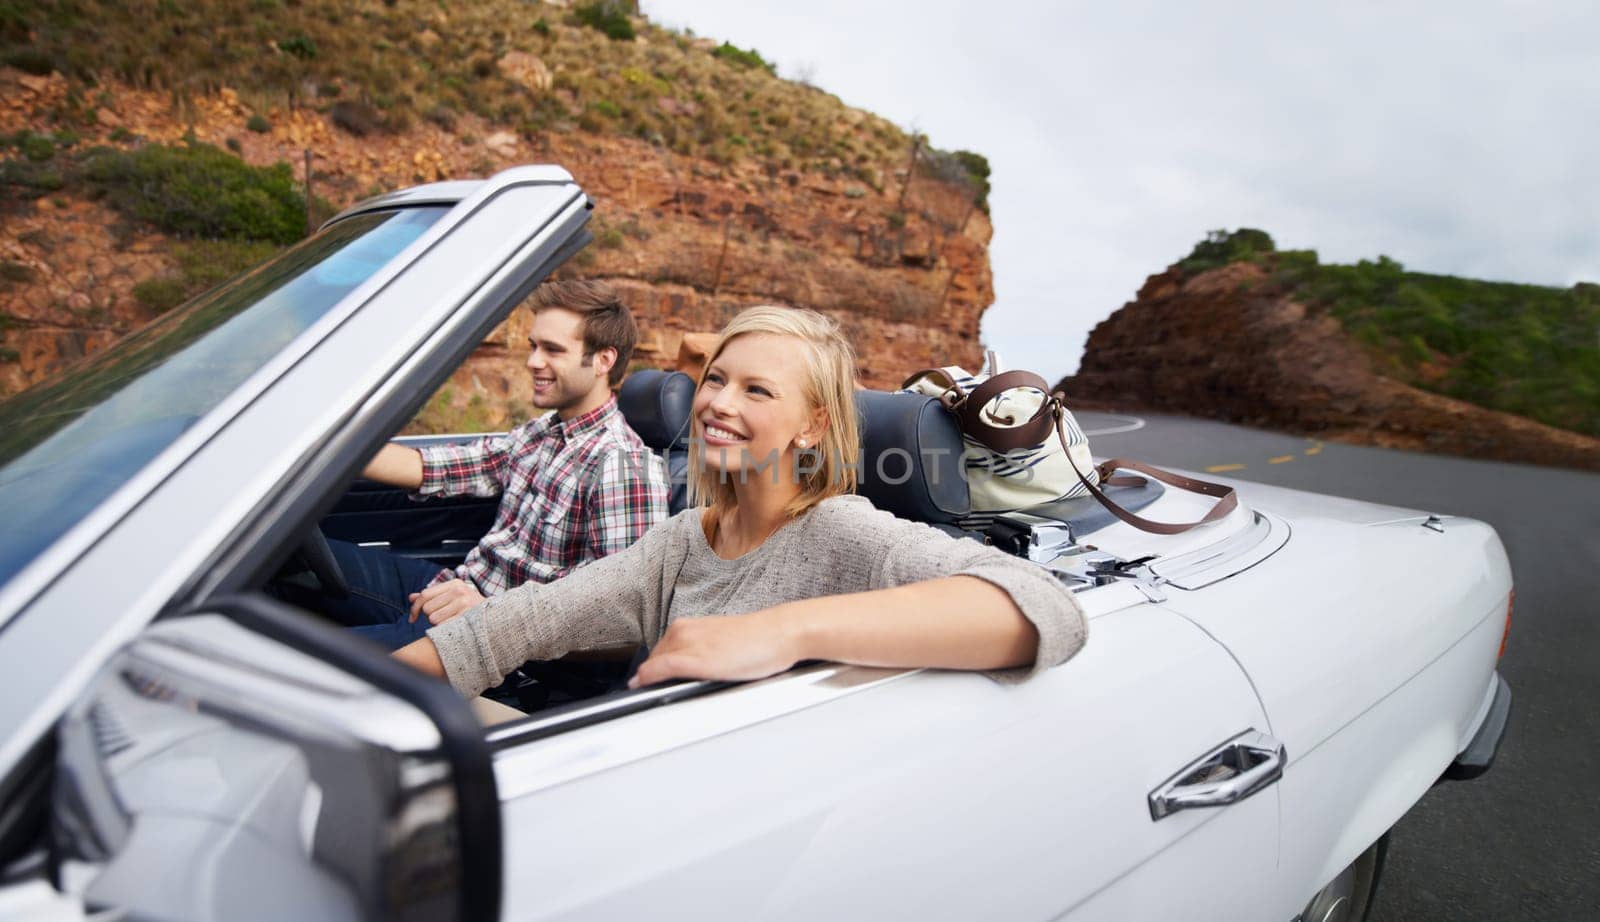 Happy couple, car and driving on road trip for travel, holiday weekend or outdoor vacation on street in nature. Young man and woman with smile for transportation or getaway in convertible vehicle by YuriArcurs